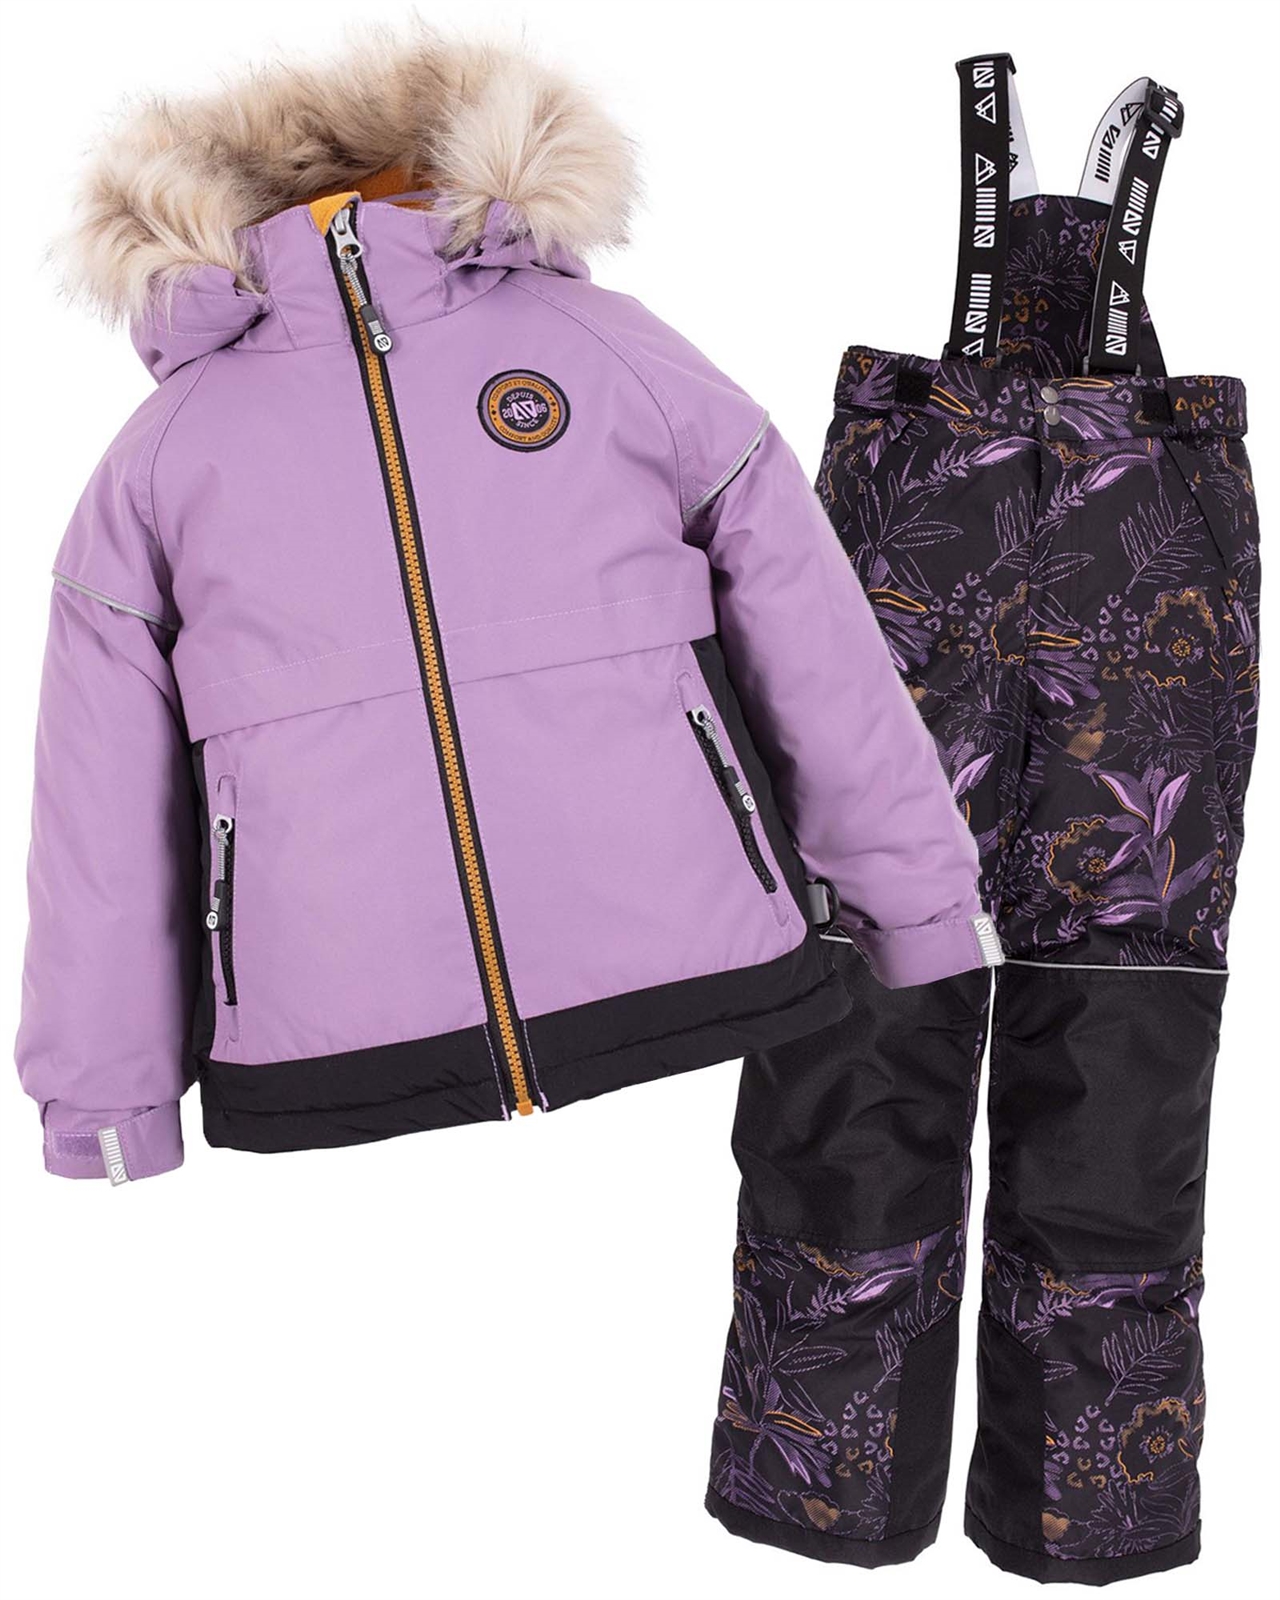 NANO Girls' Luna Two-piece Snowsuit with Printed Pants, Sizes 4-14